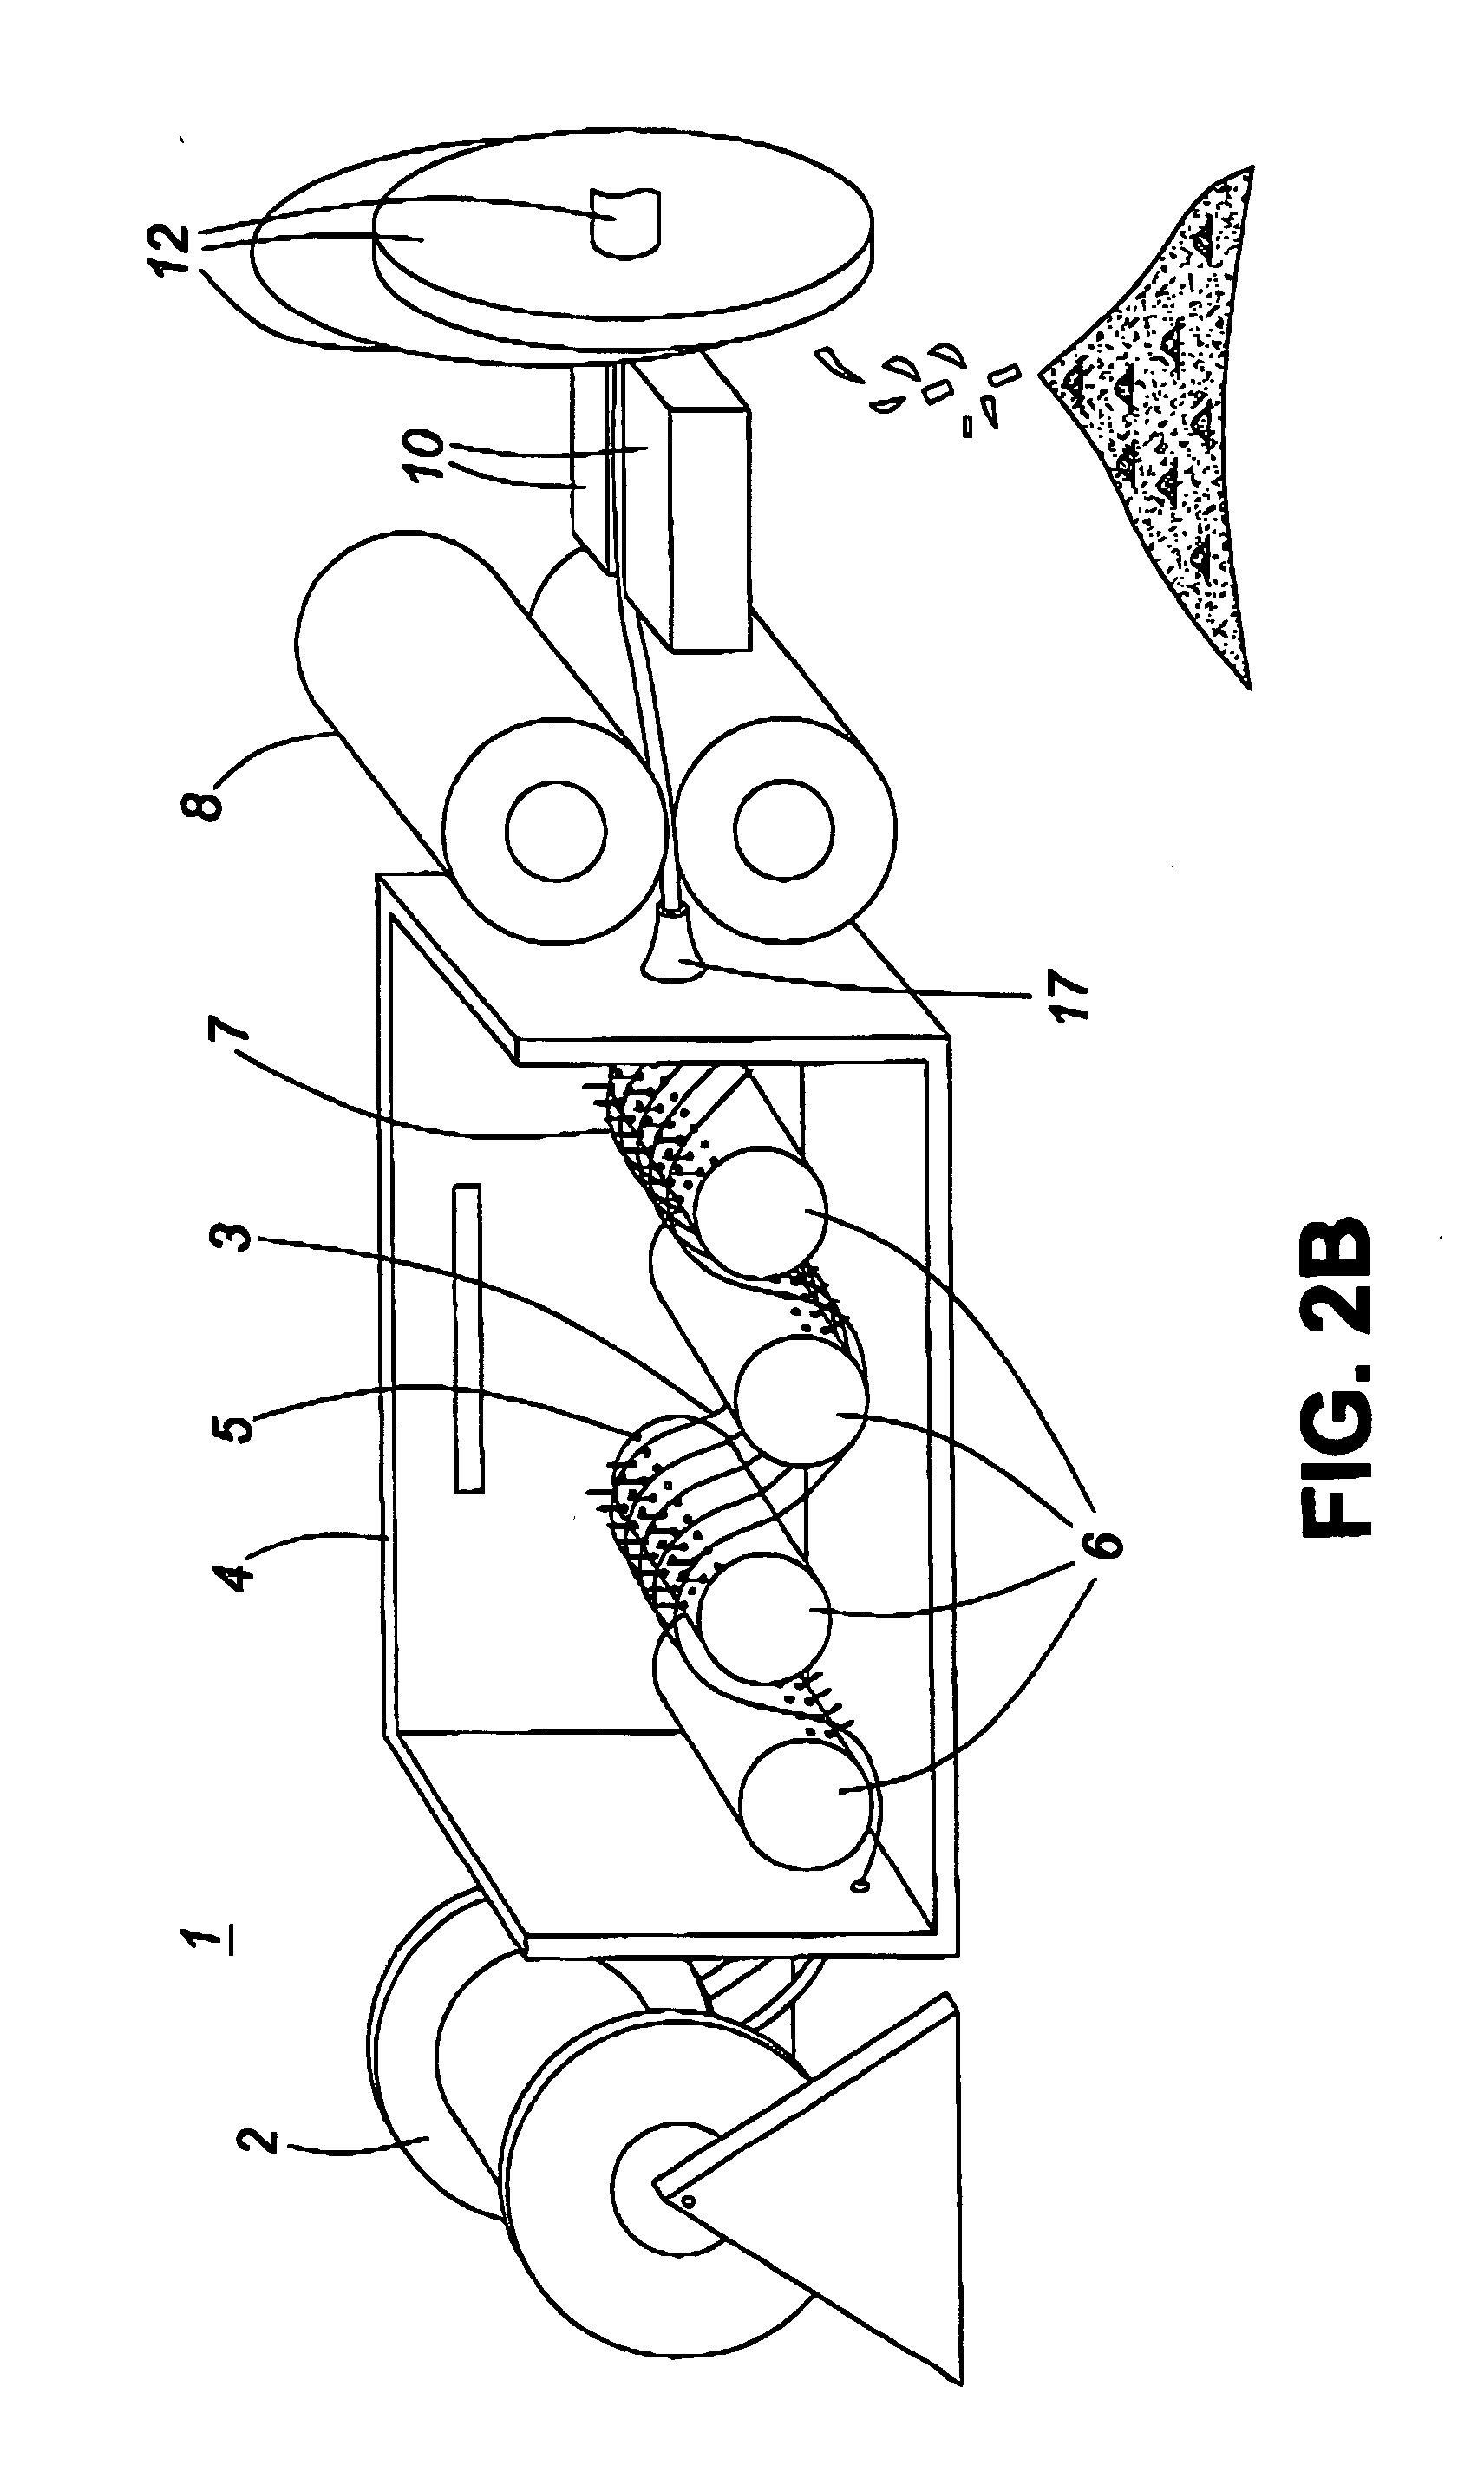 Method and apparatus for fabrication of polymer-coated fibers